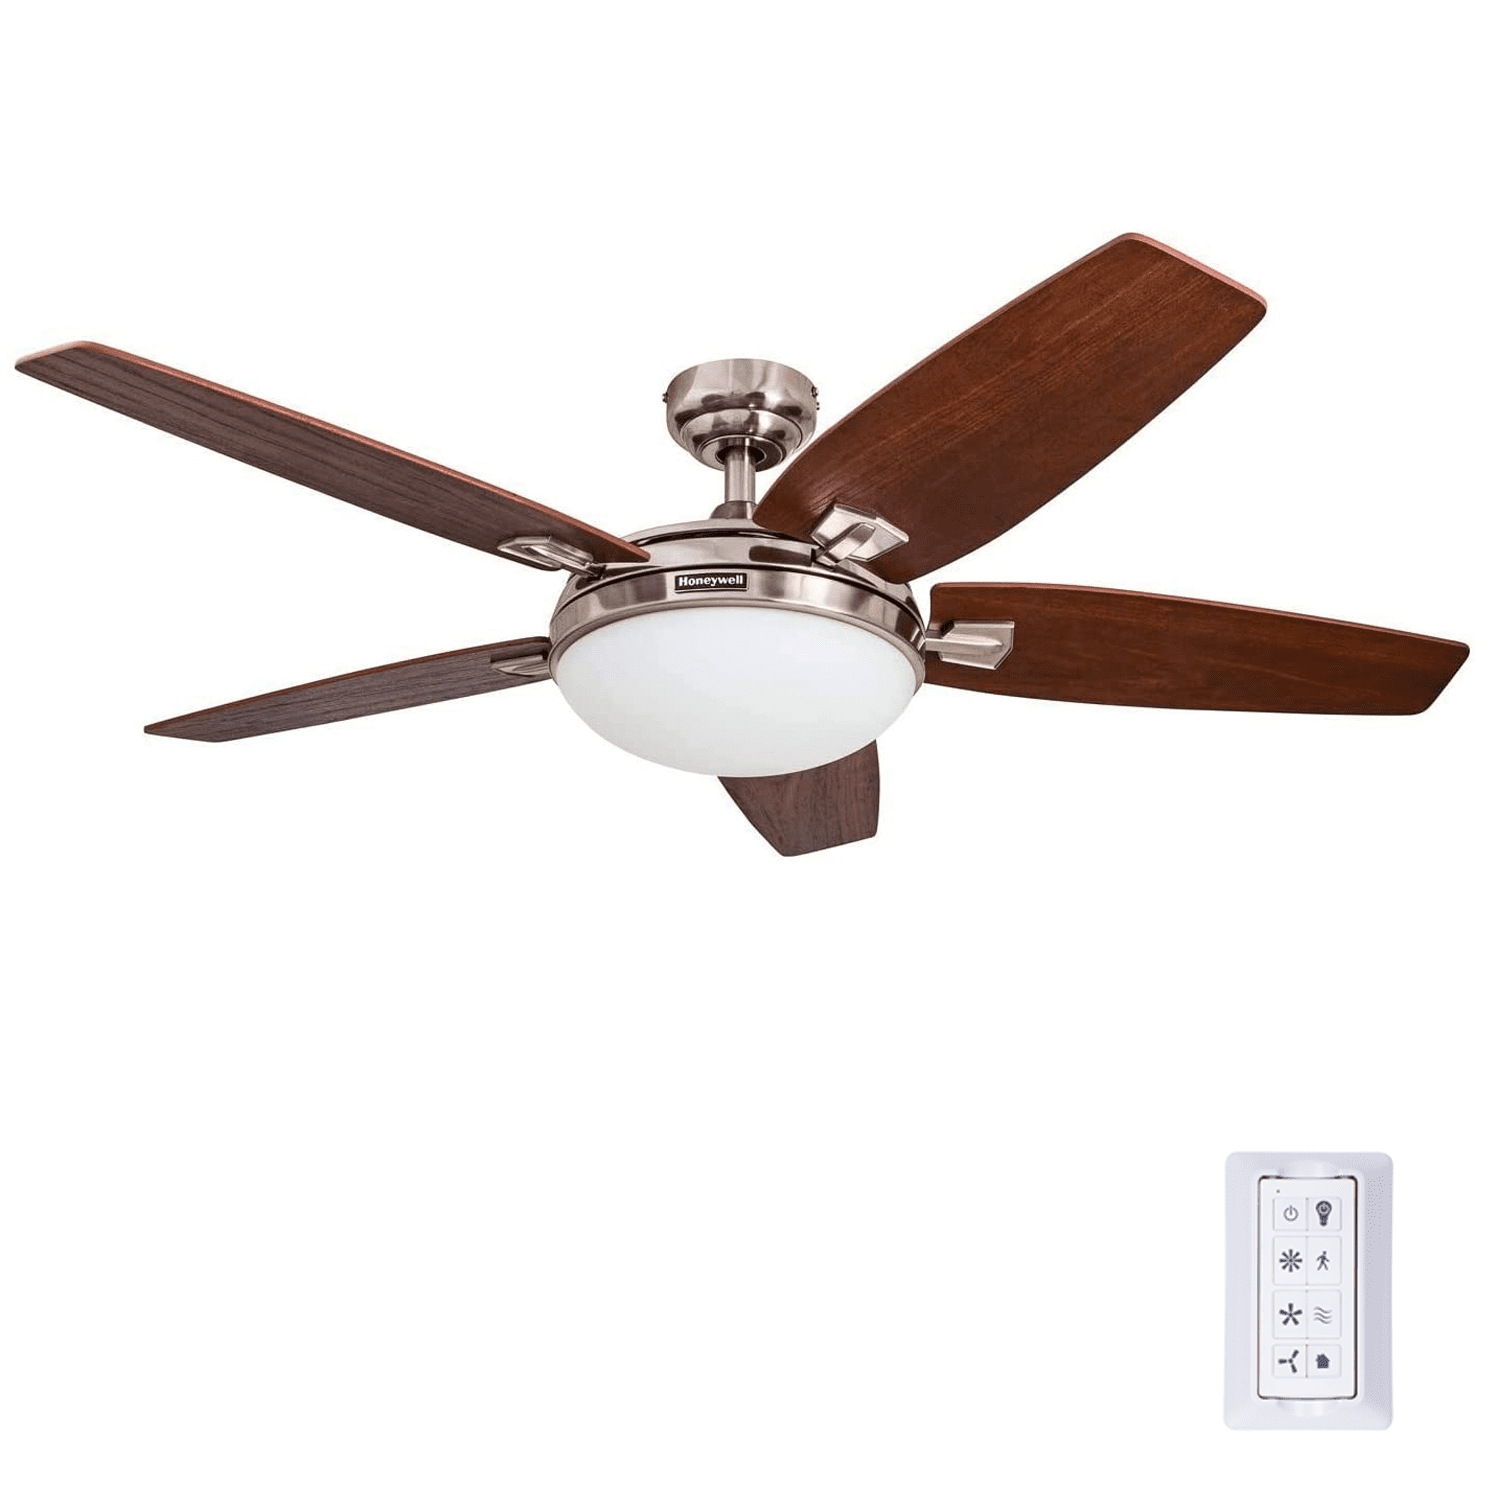 48 Honeywell Carmel Brushed Nickel, Satin Nickel Bathroom Exhaust Fan With Light And Remote